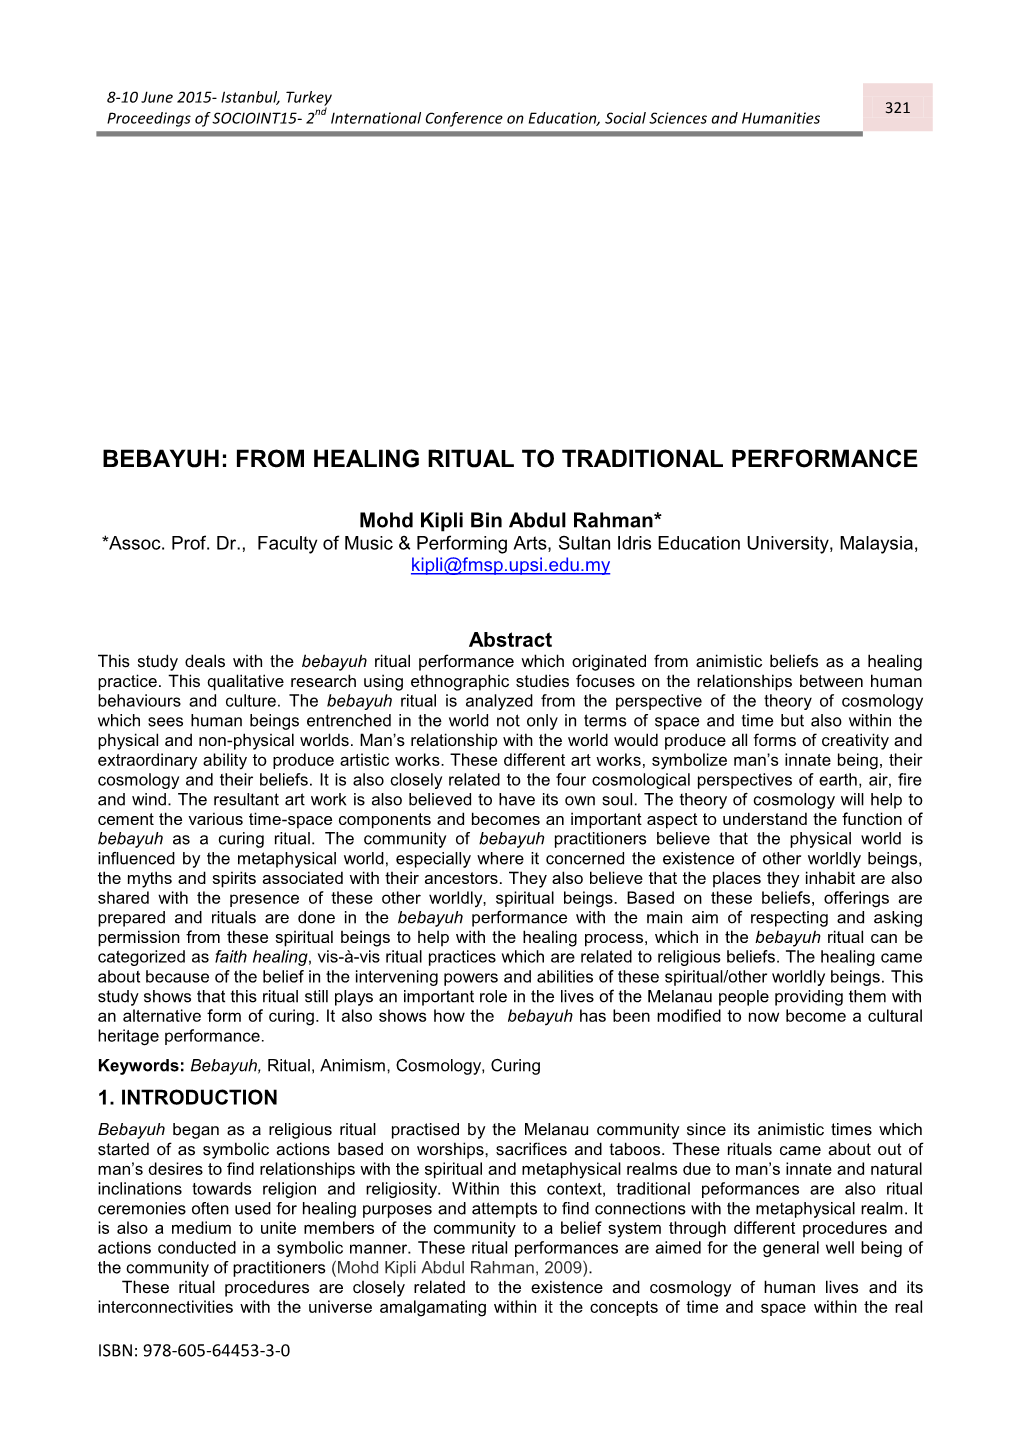 From Healing Ritual to Traditional Performance